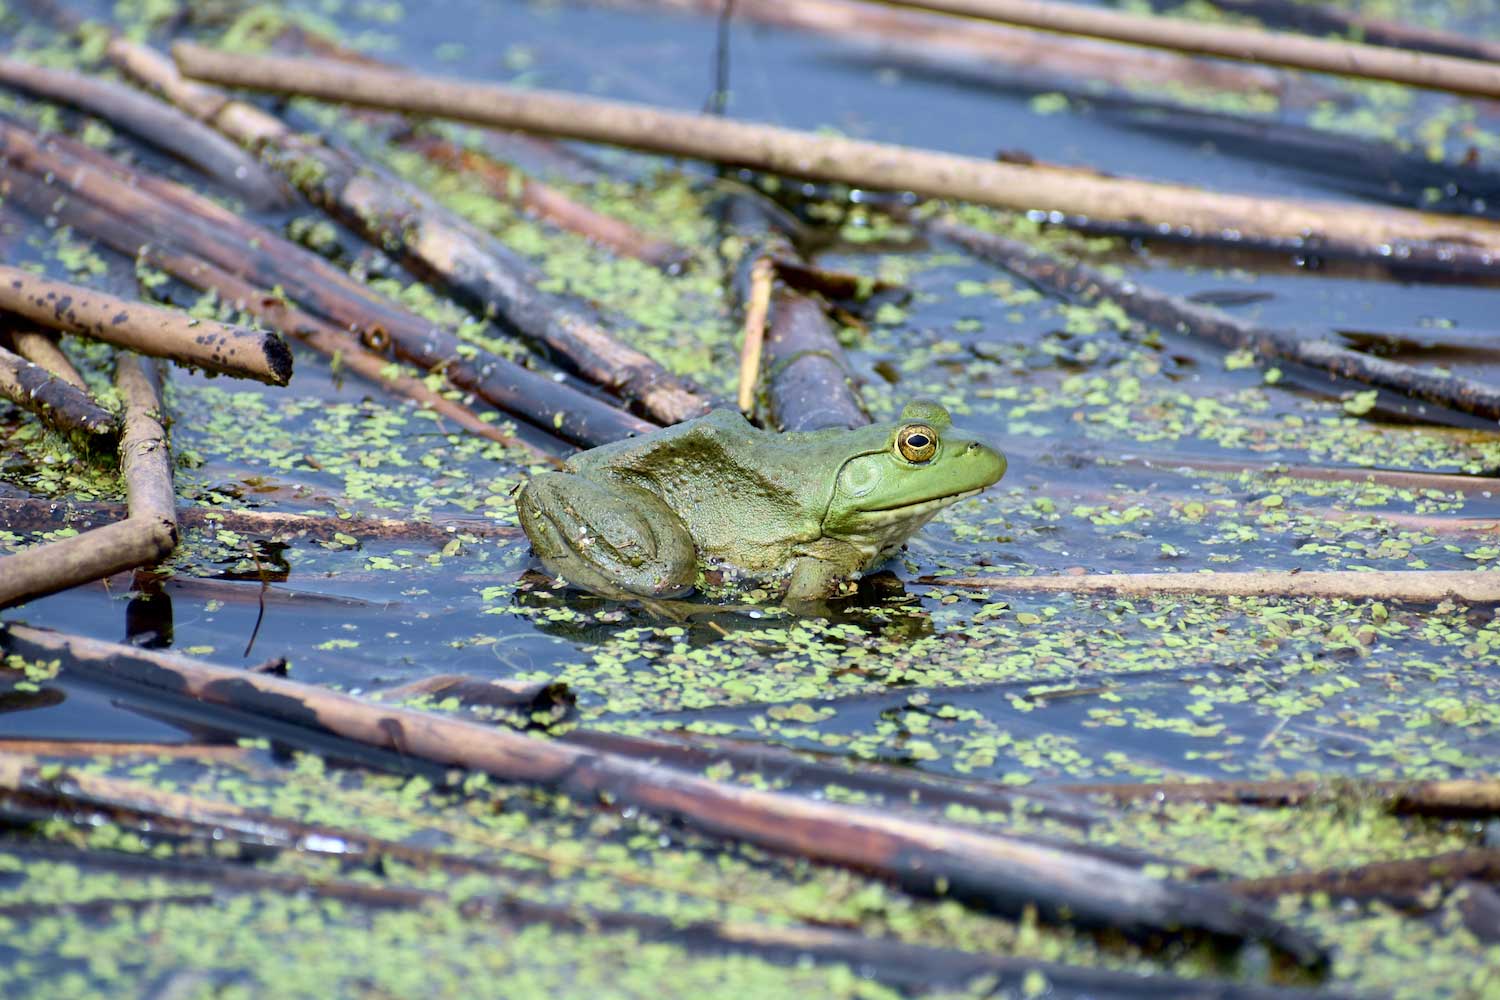 A bullfrog sitting atop the water.